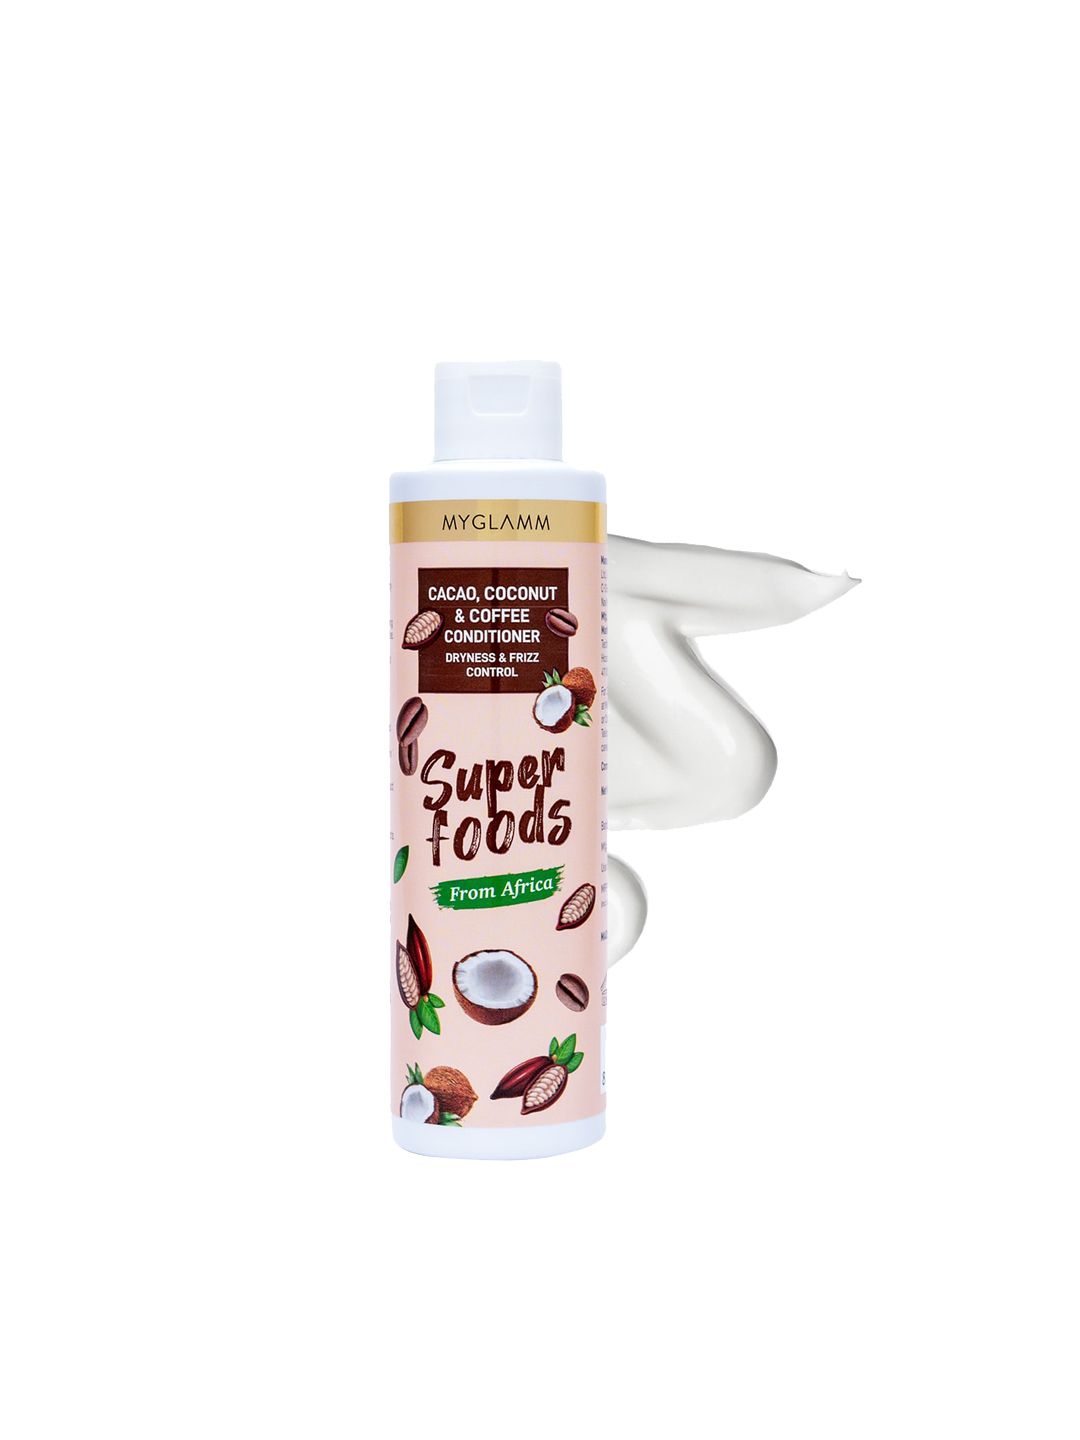 MyGlamm Superfoods Cacao Coconut & Coffee Conditioner -200ml Price in India